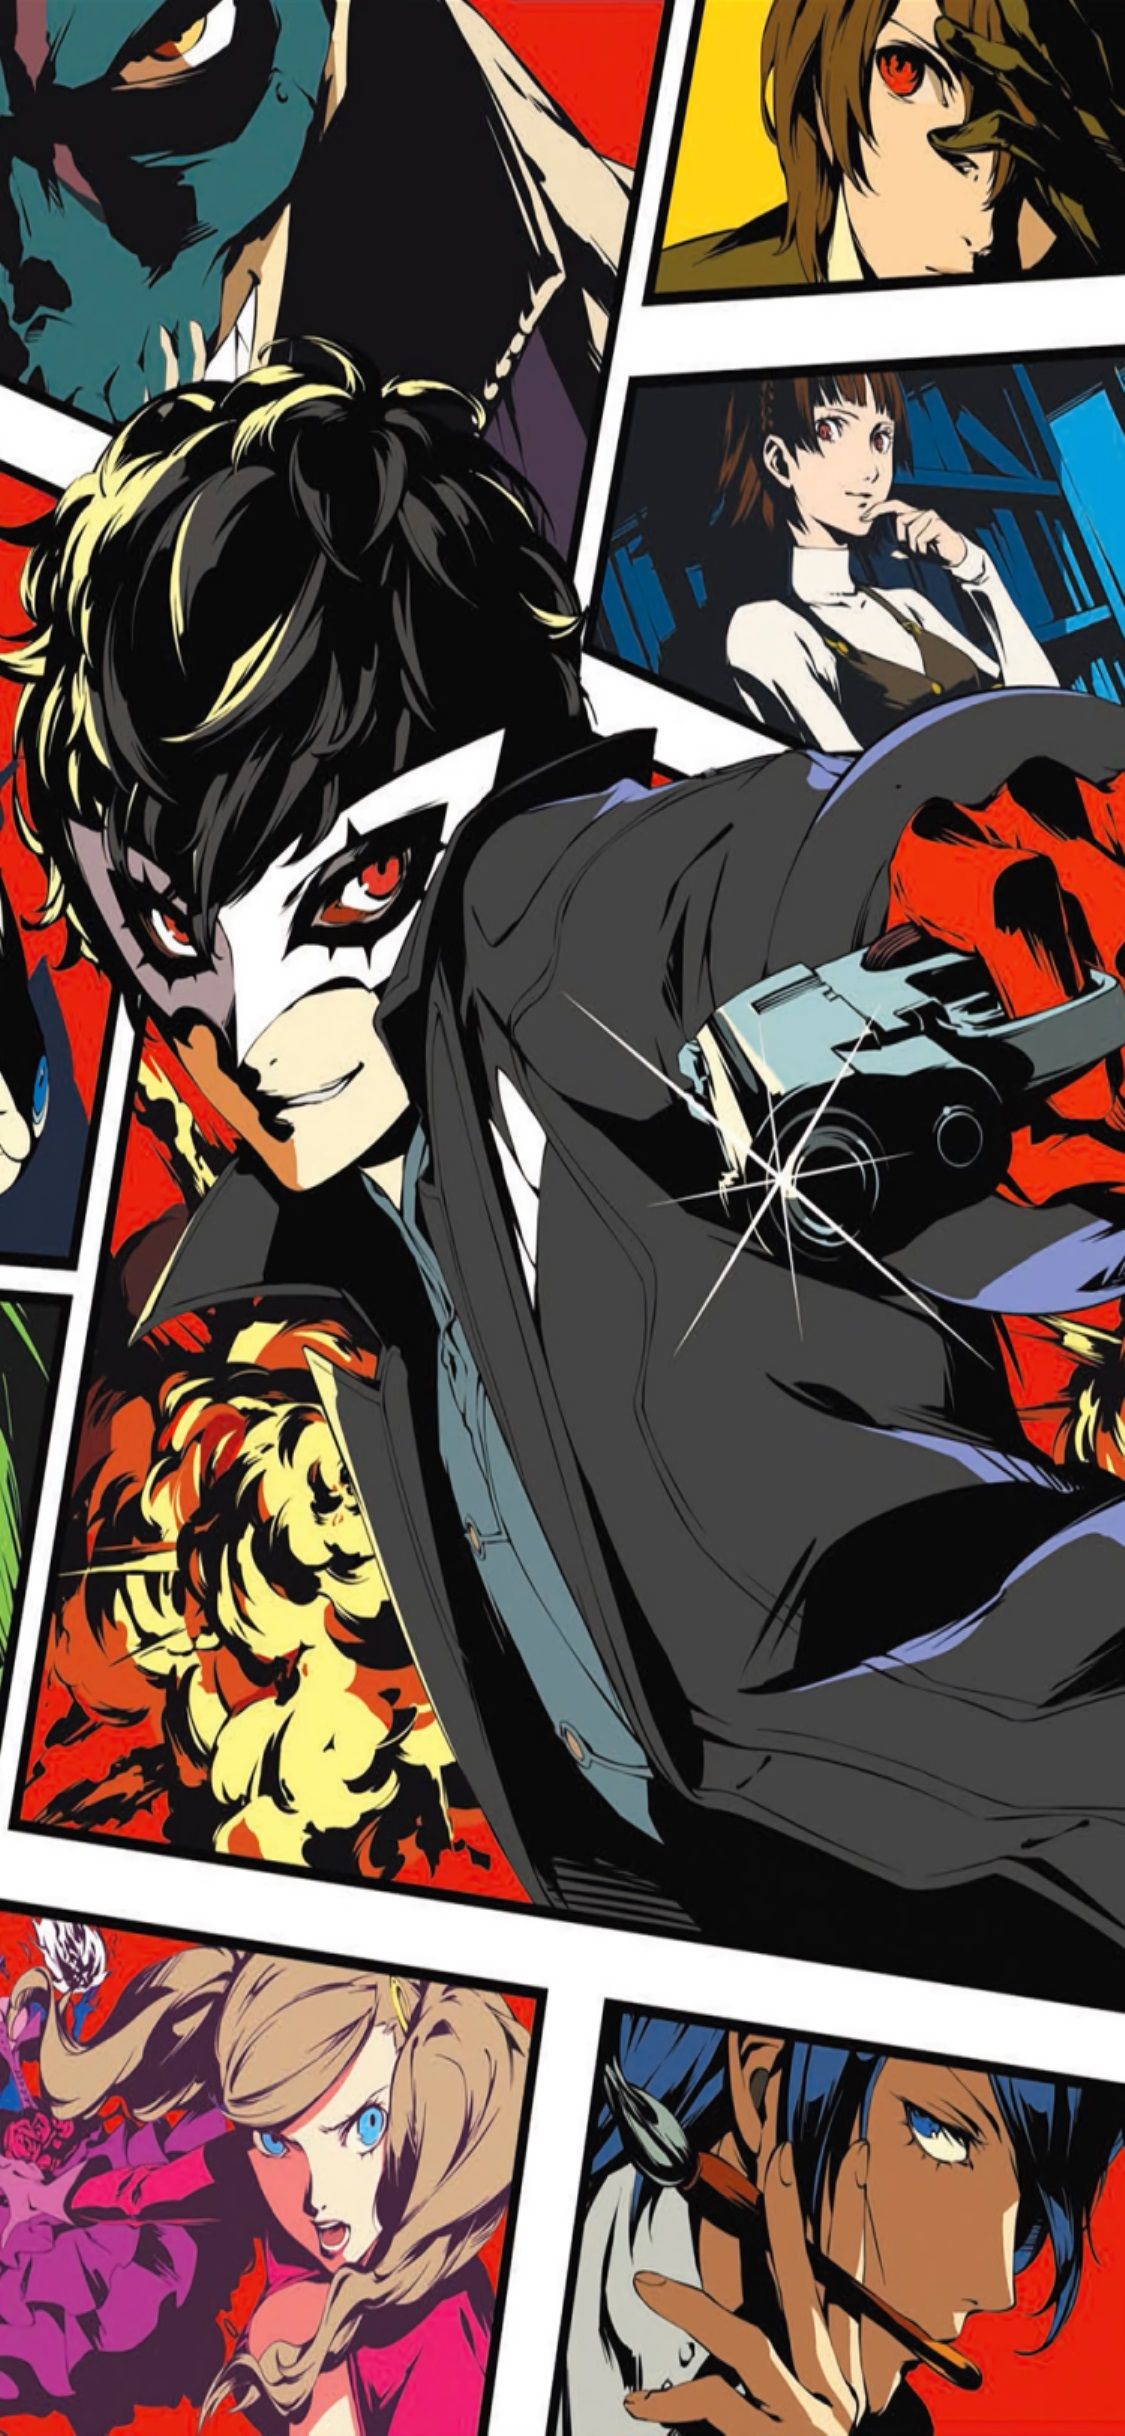 HD iPhone x persona 5 wallpaper and image collection for Desktop & Mobile. Free wallpaper download